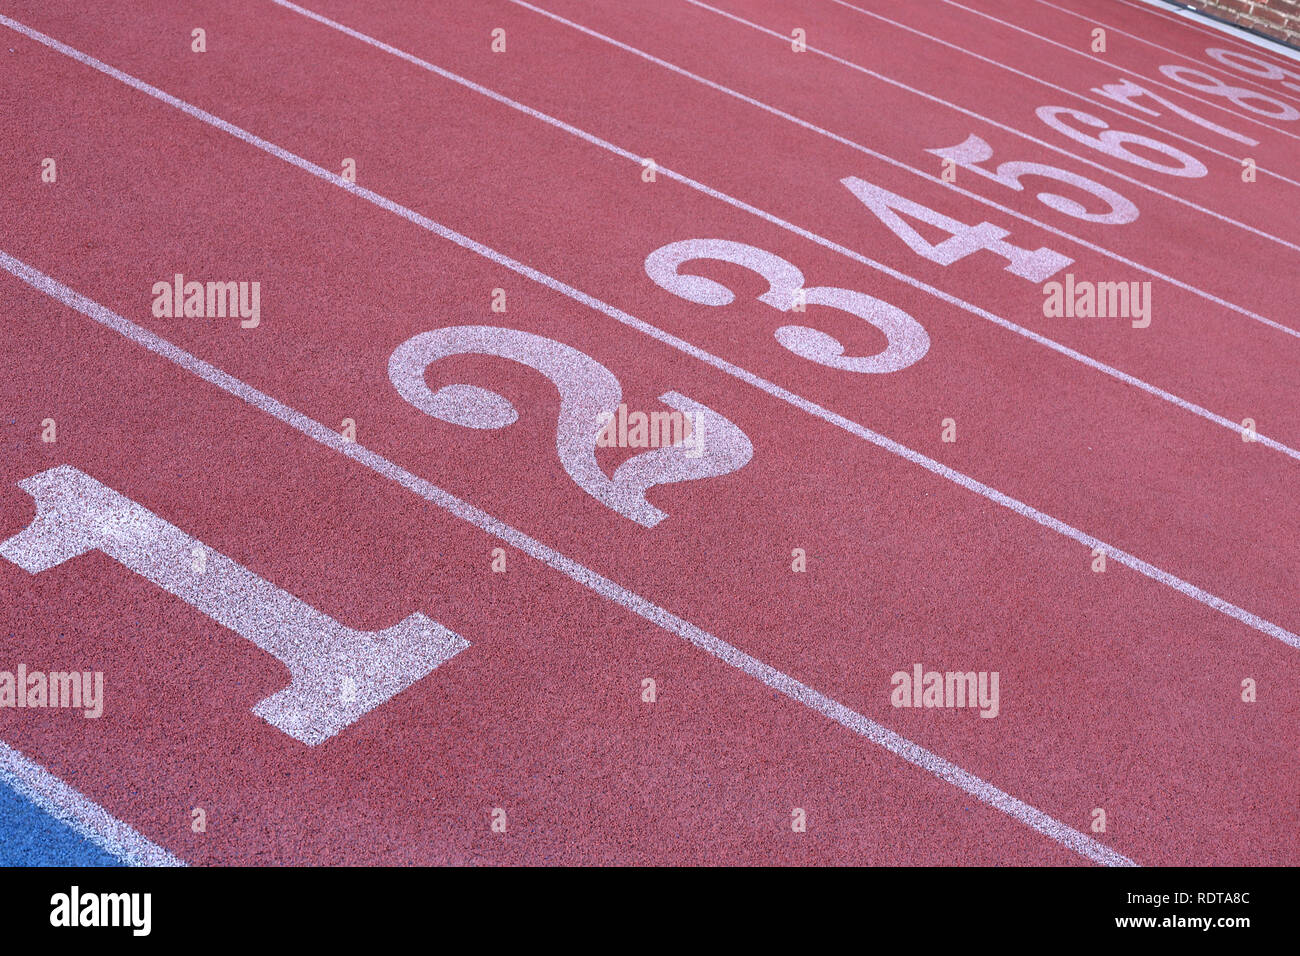 Track and Field Race Course lane numbers 1 thru 9 Stock Photo